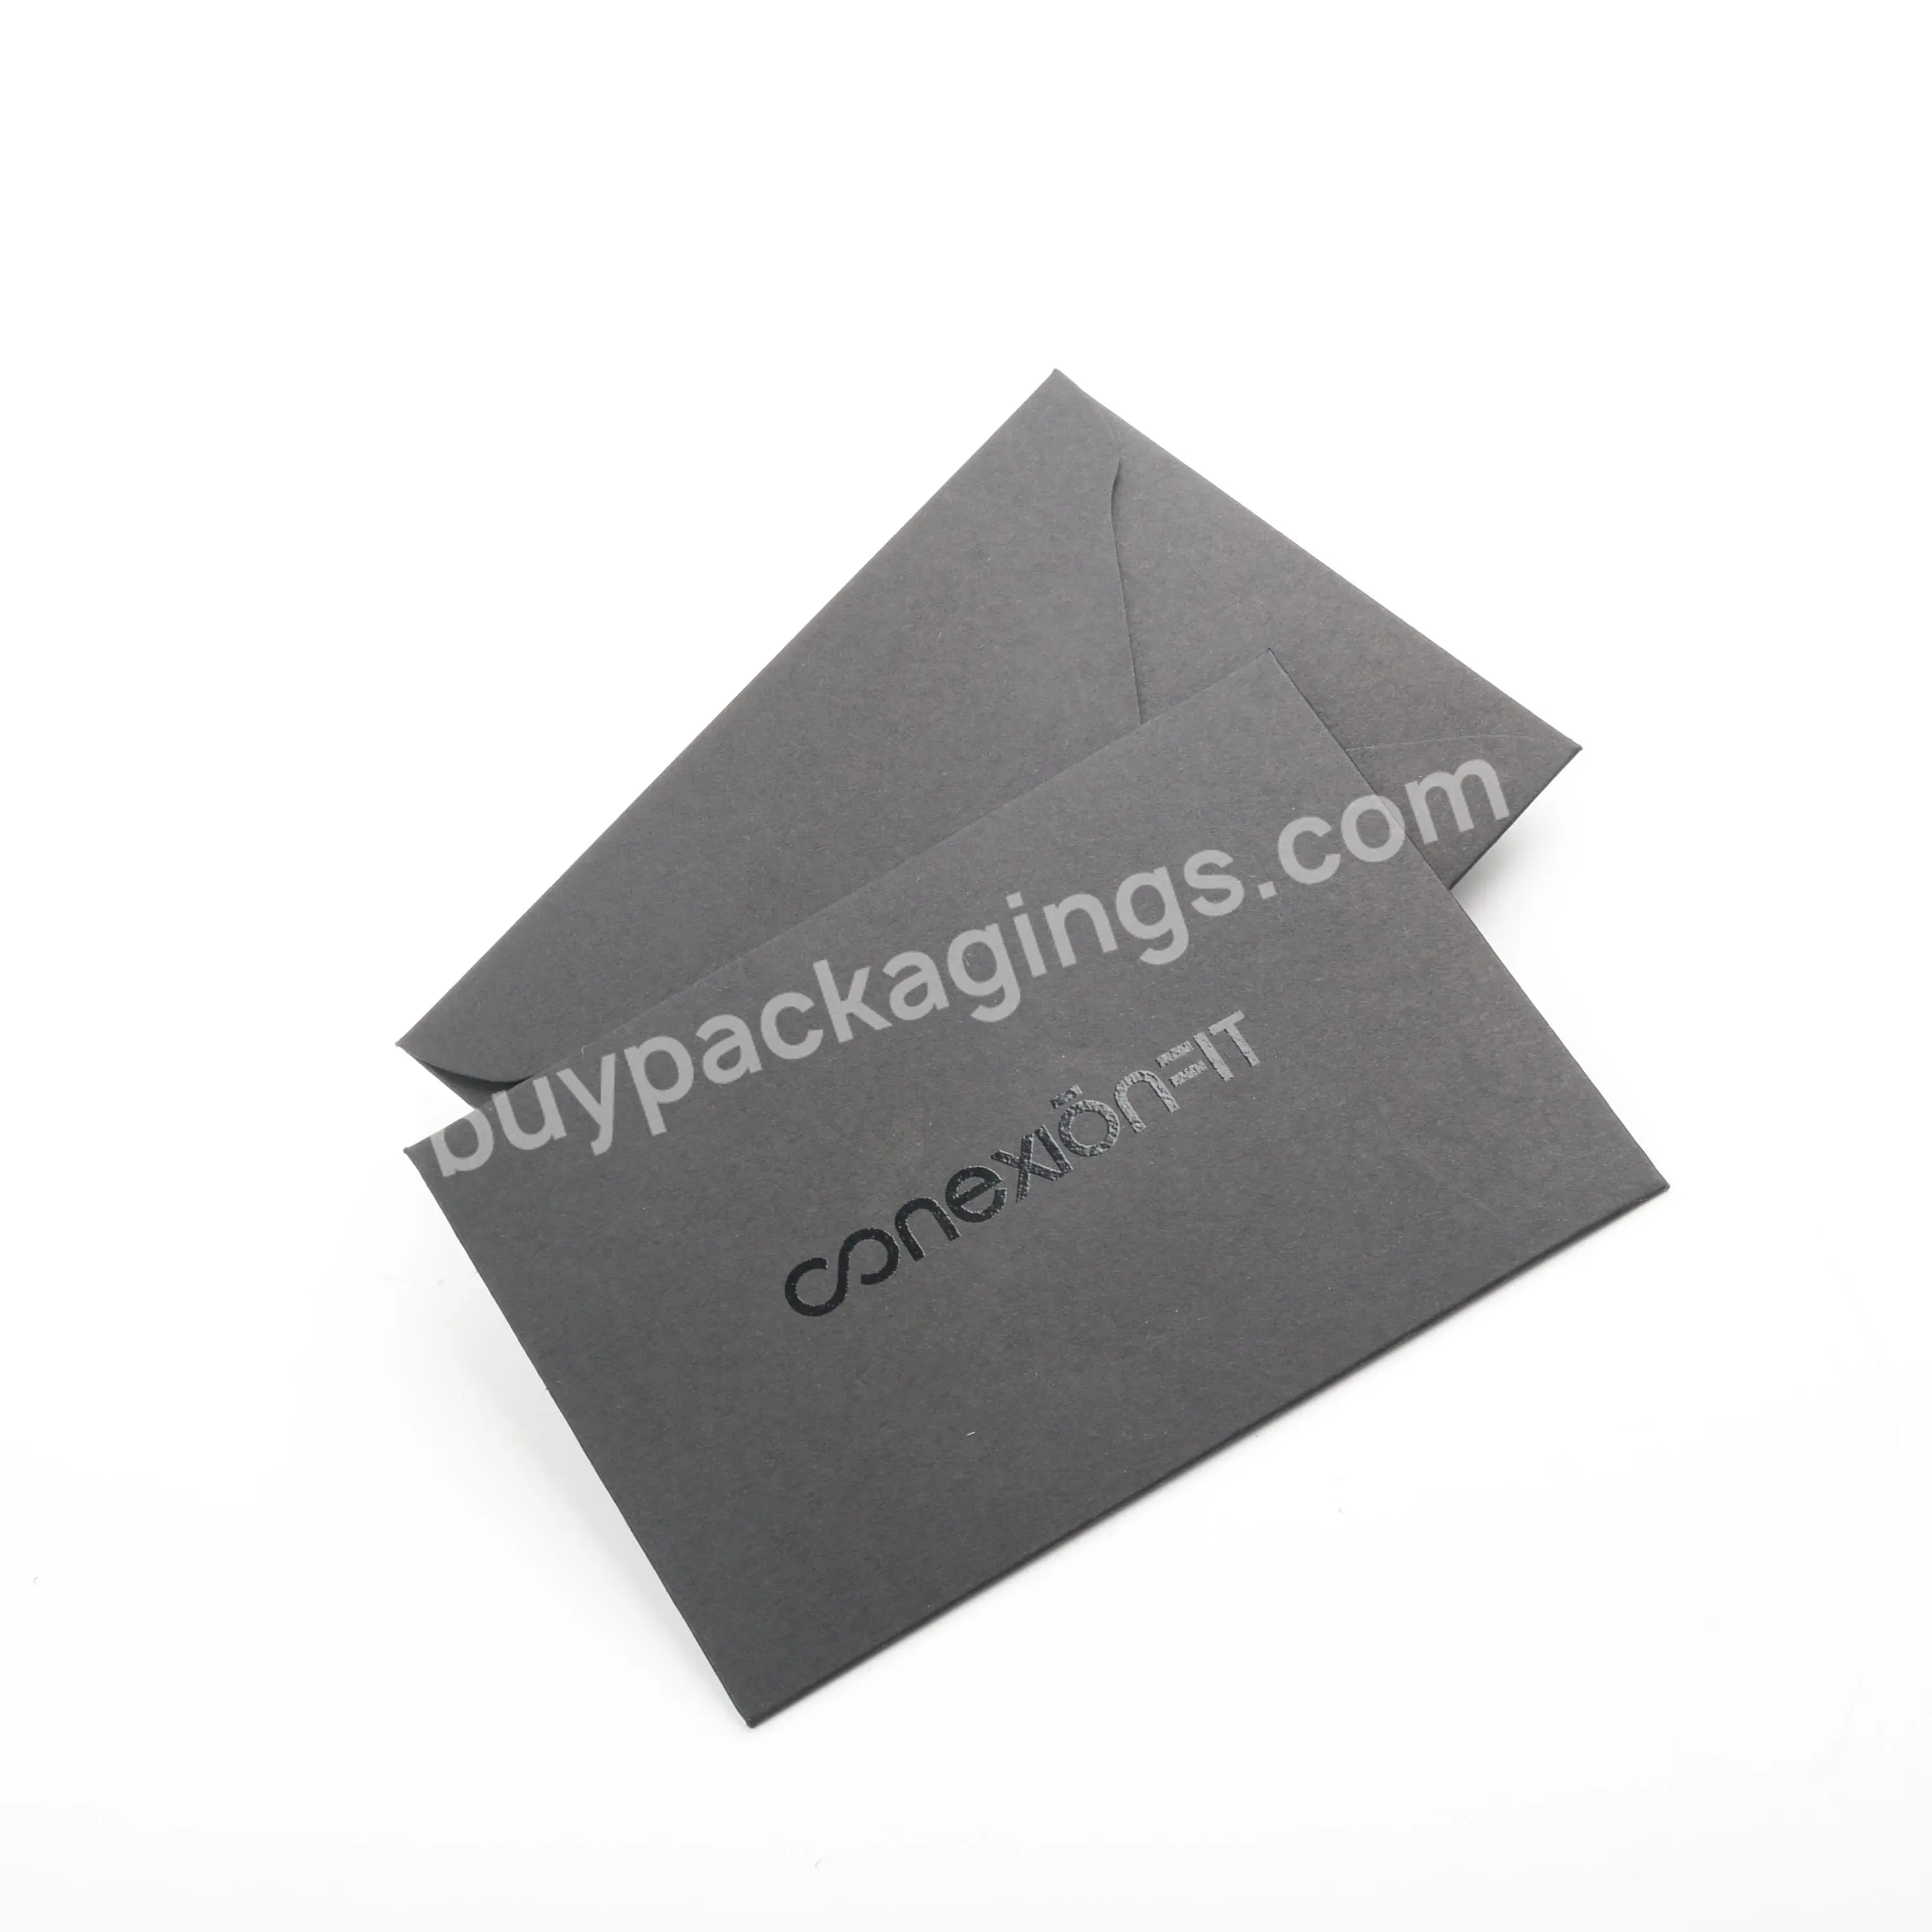 New Product Thank You Cards 100 Pieces Paper Card Envelopes With Envelopes For Friends